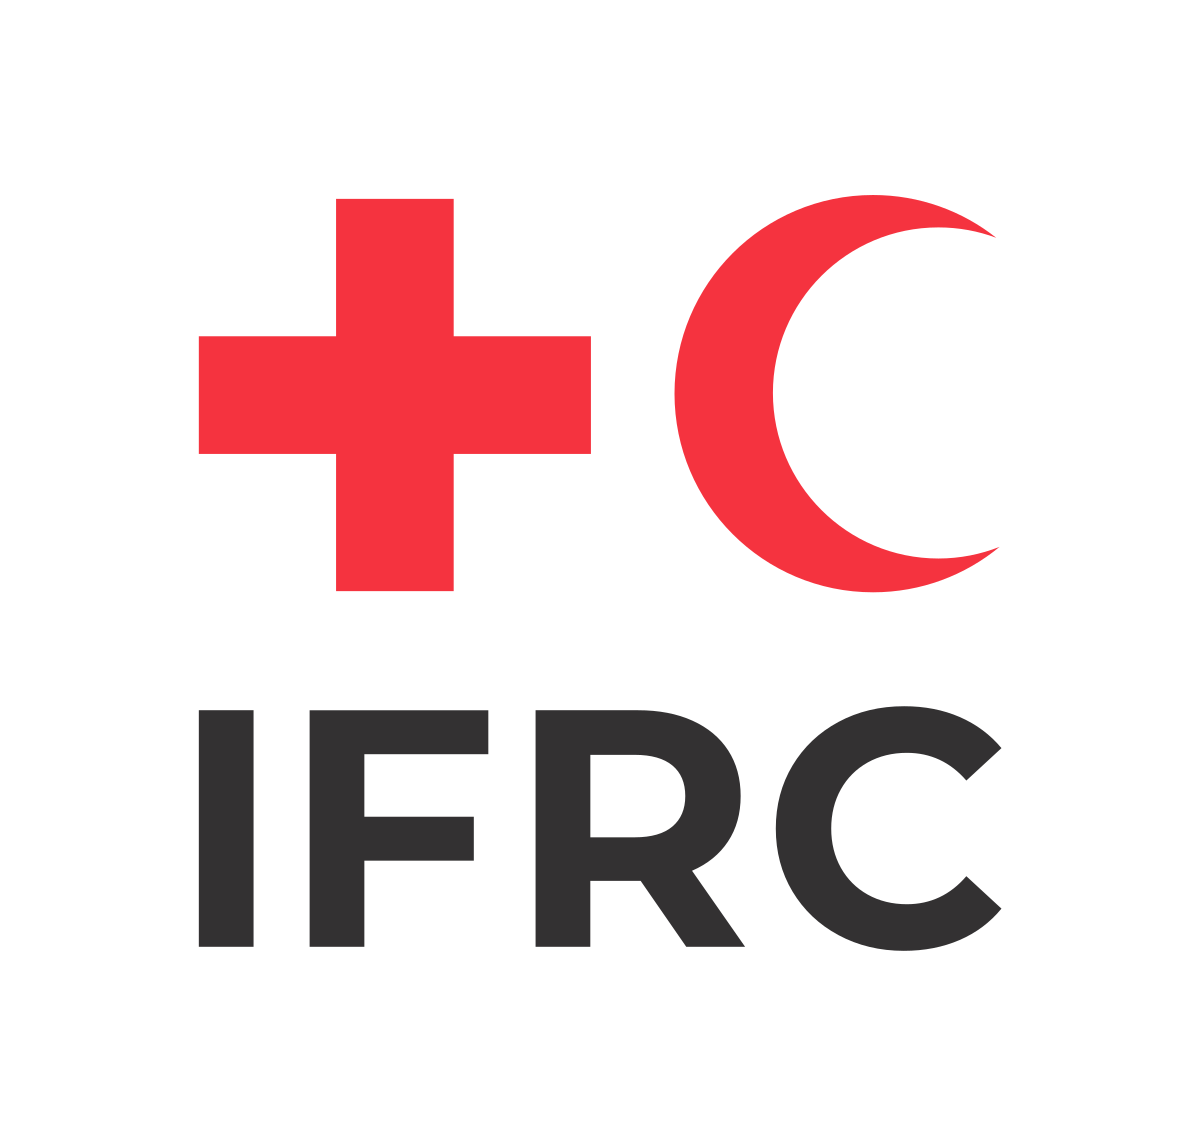 The International Federation of Red Cross and Red Crescent Societies (IFRC)